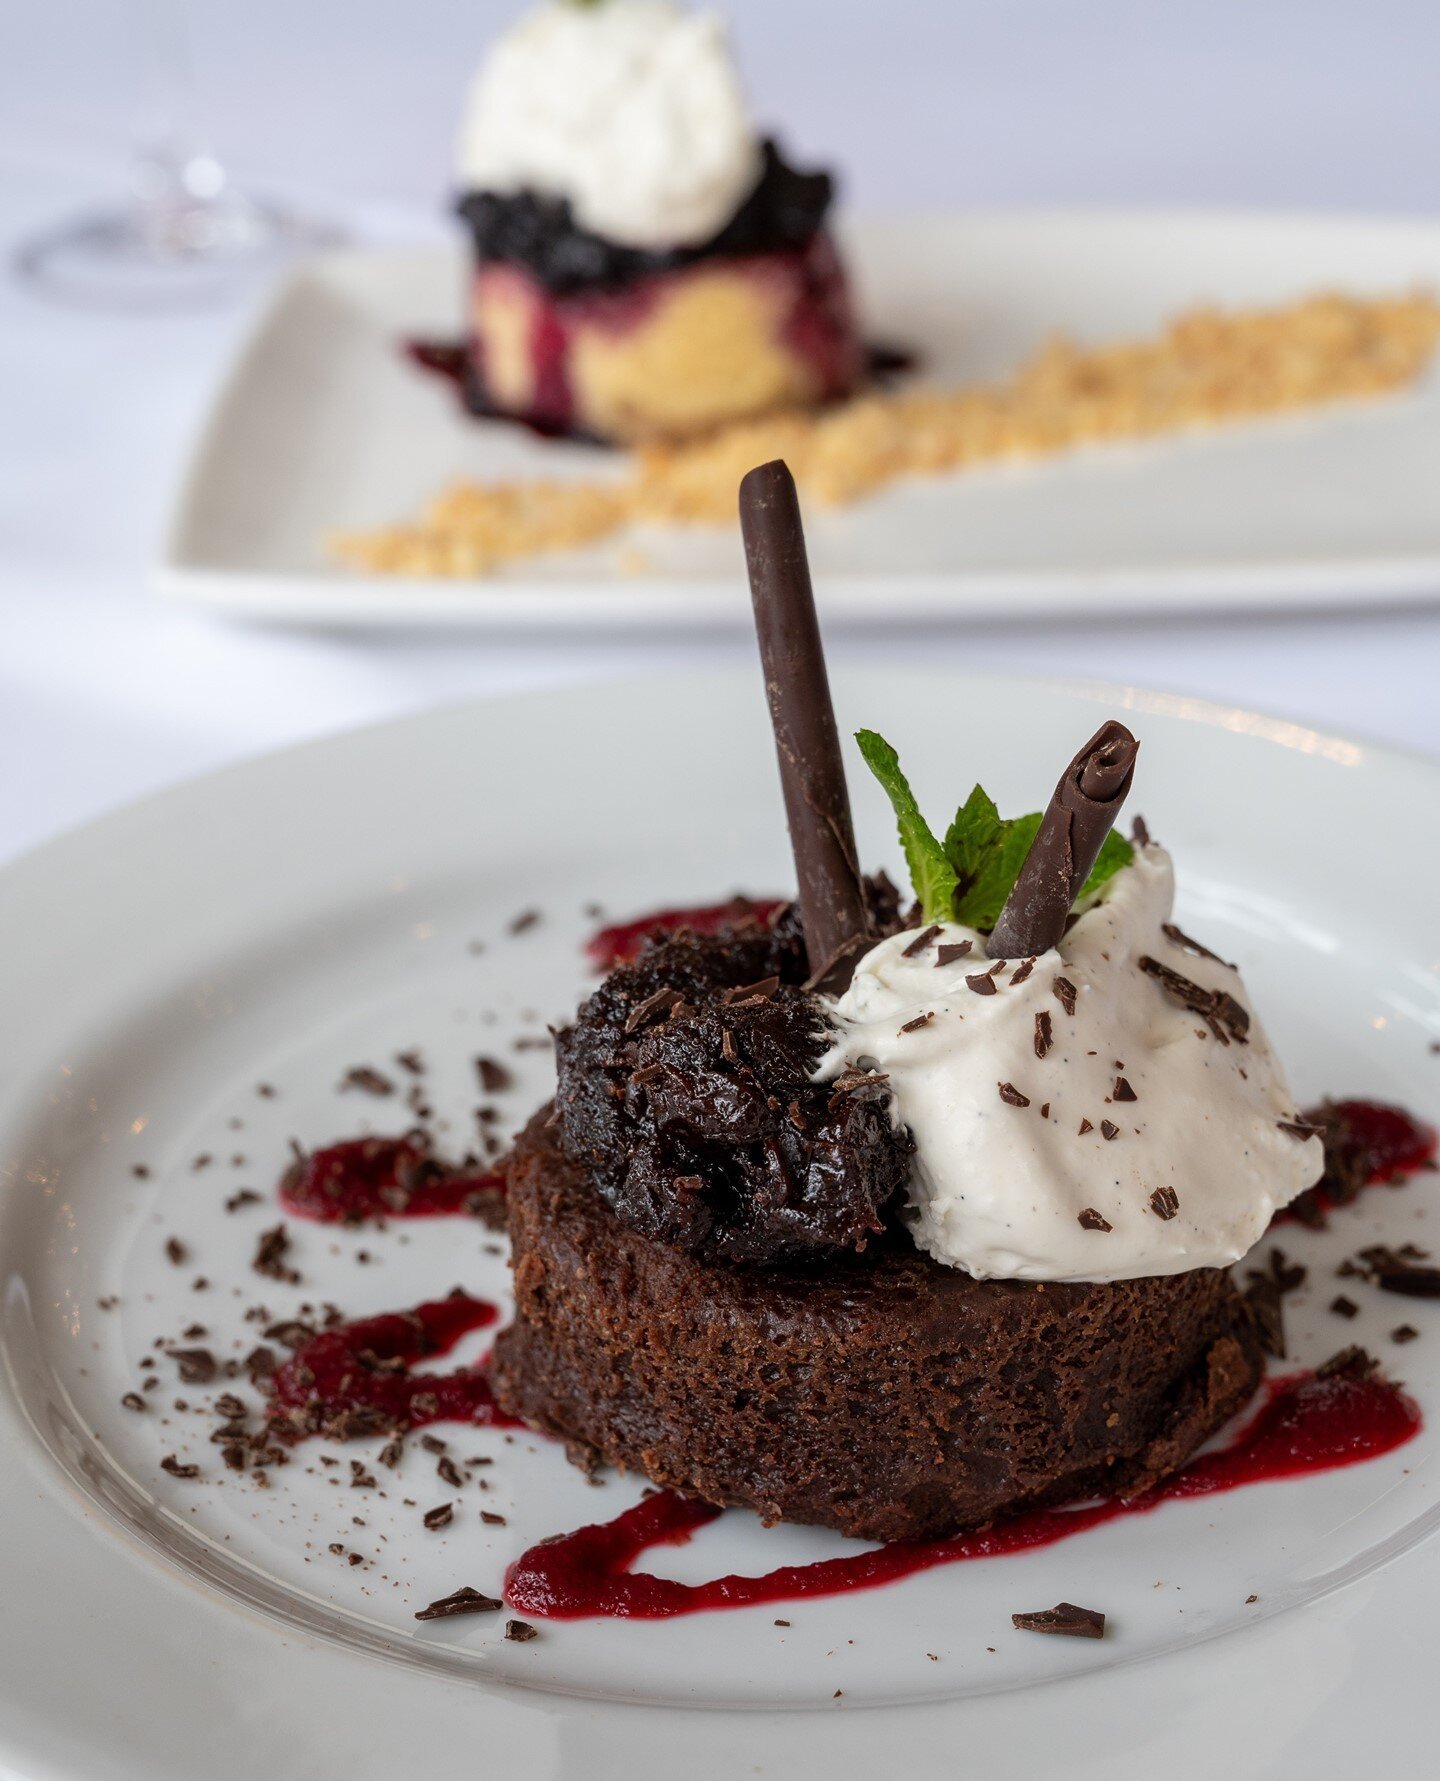 The best part of Restaurant Week?⁠
⁠
Dessert!⁠
⁠
*Available for dine in or take out.⁠
⁠
#seafood #seafoodporn #seafoodlover #seafoodlove #seafoodlovers #seafoodtime #freshseafood #seafoodresturant #seafoodie #seafoods #clevelandohio #clefoodies #cle 